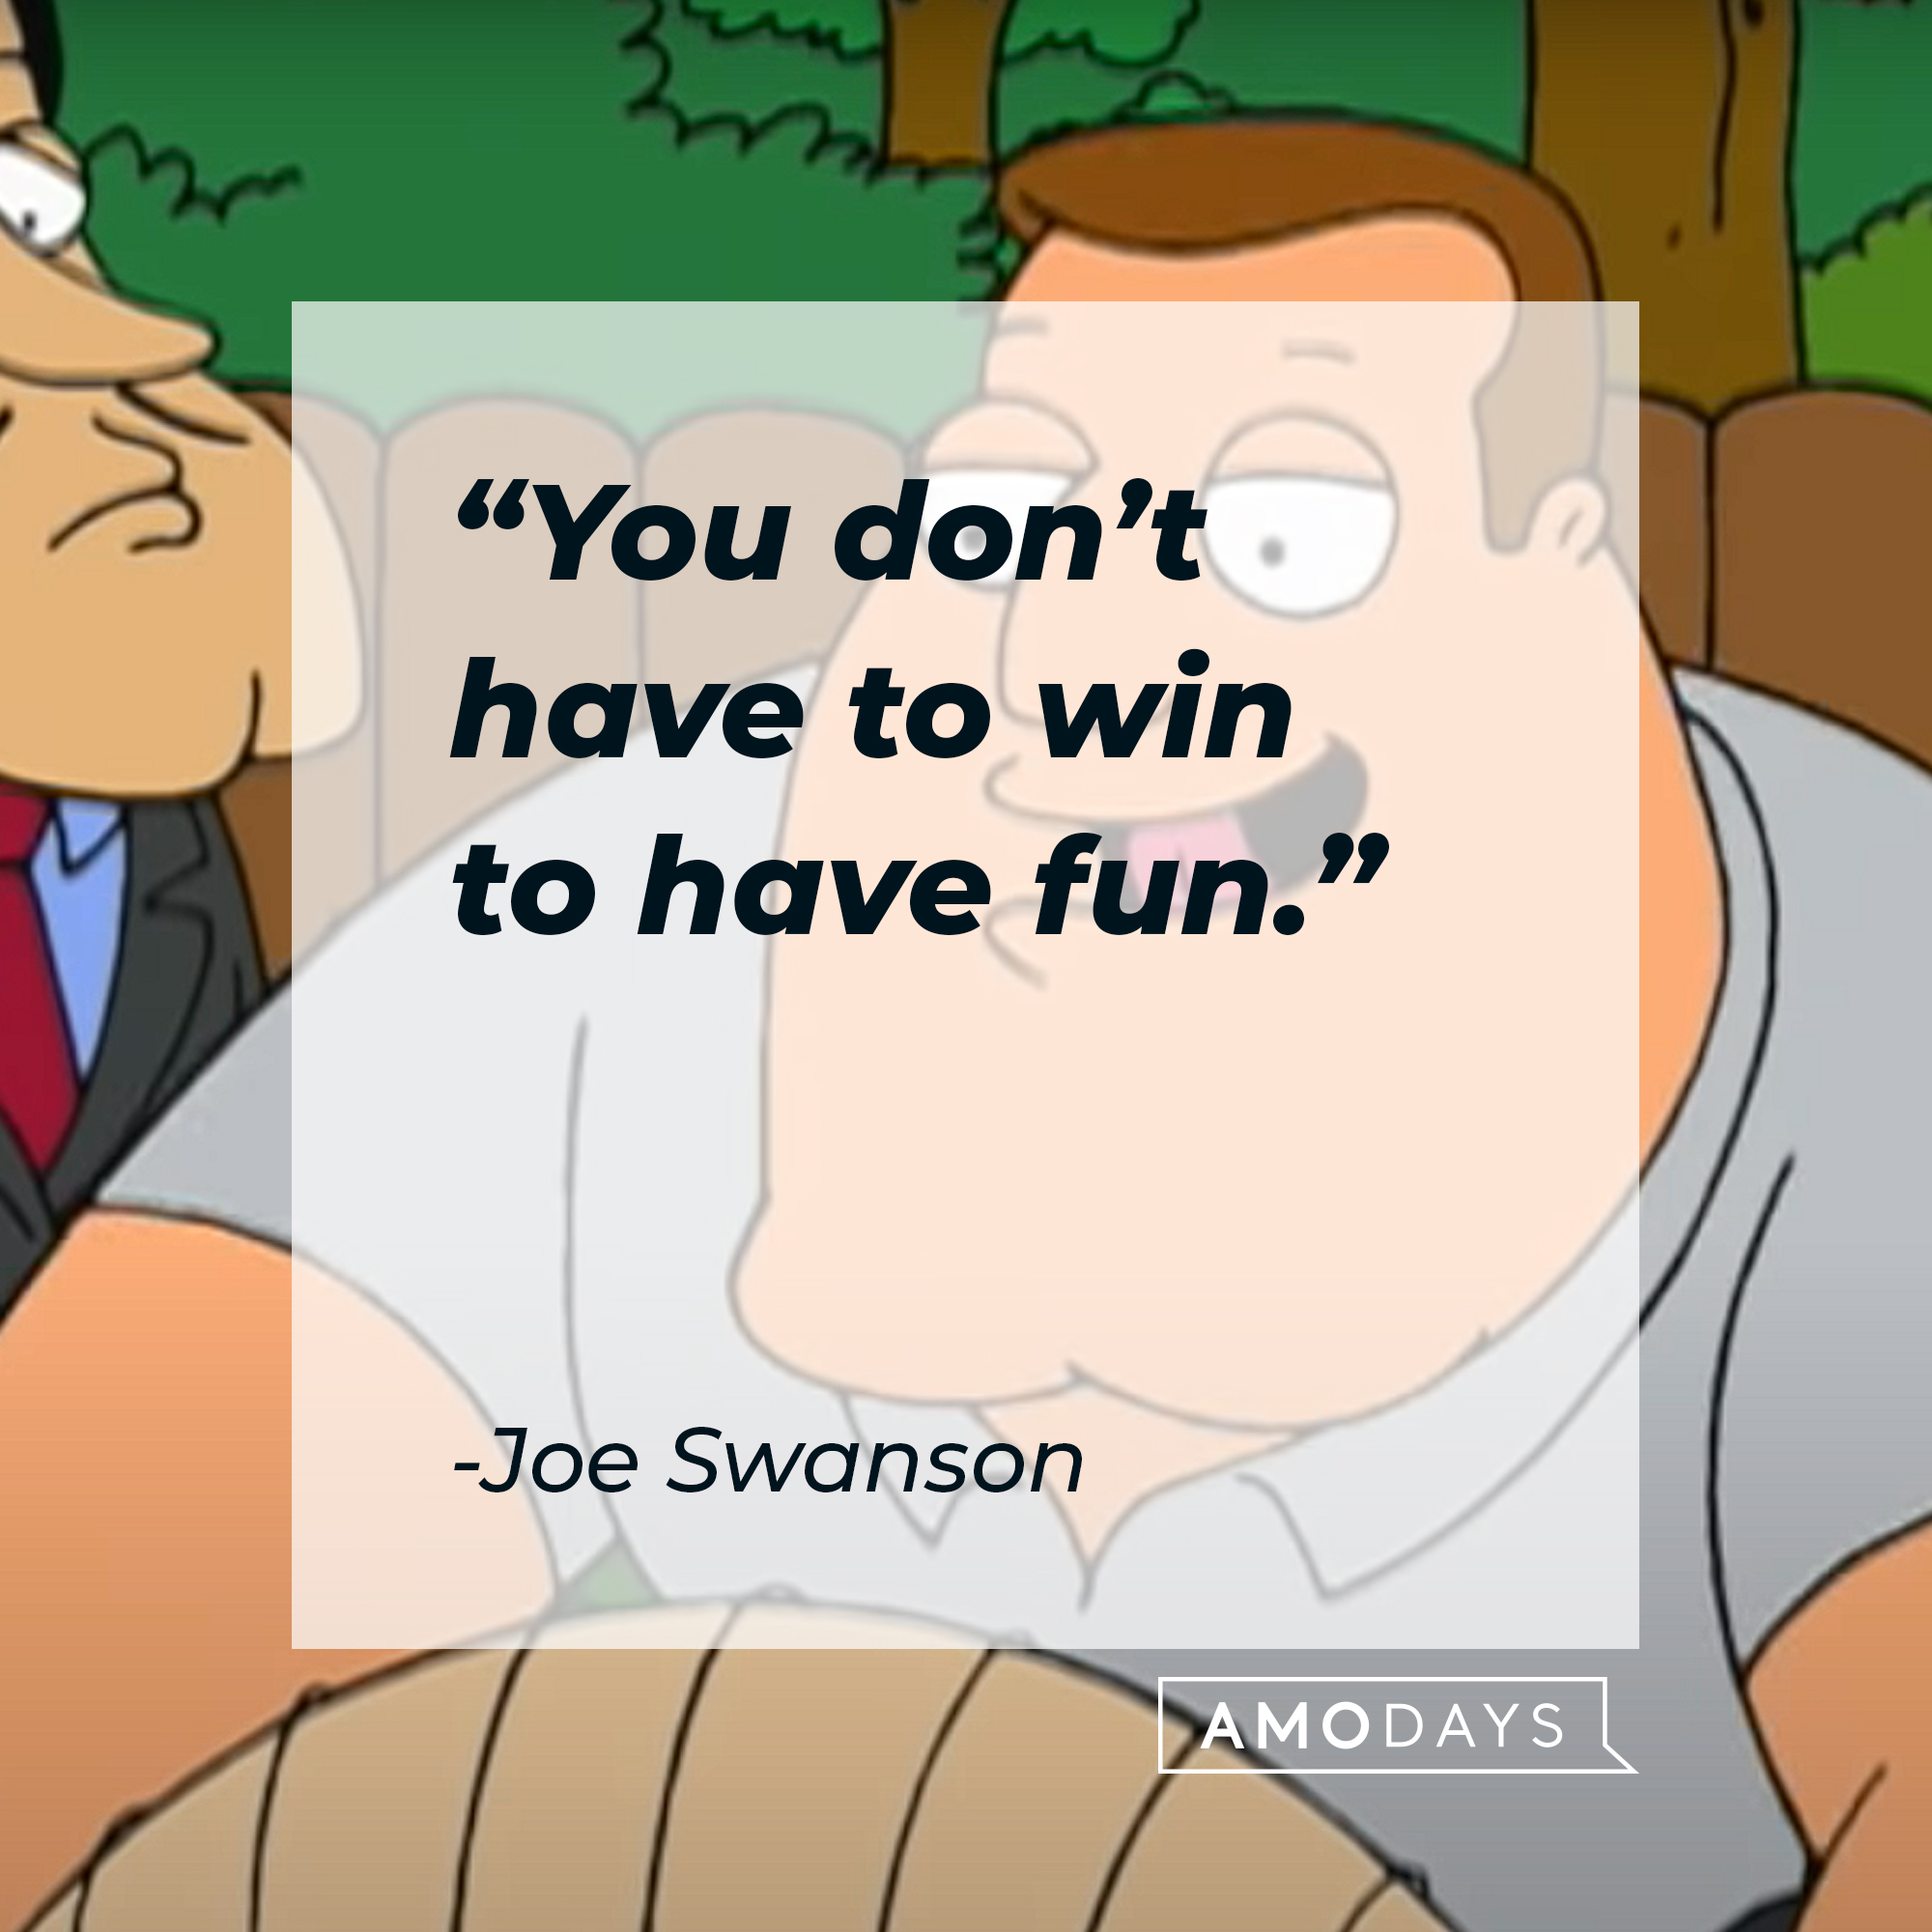 Joe Swanson from "Family Guy" with his quote: “You don’t have to win to have fun.” | Source: YouTube.com/TBS